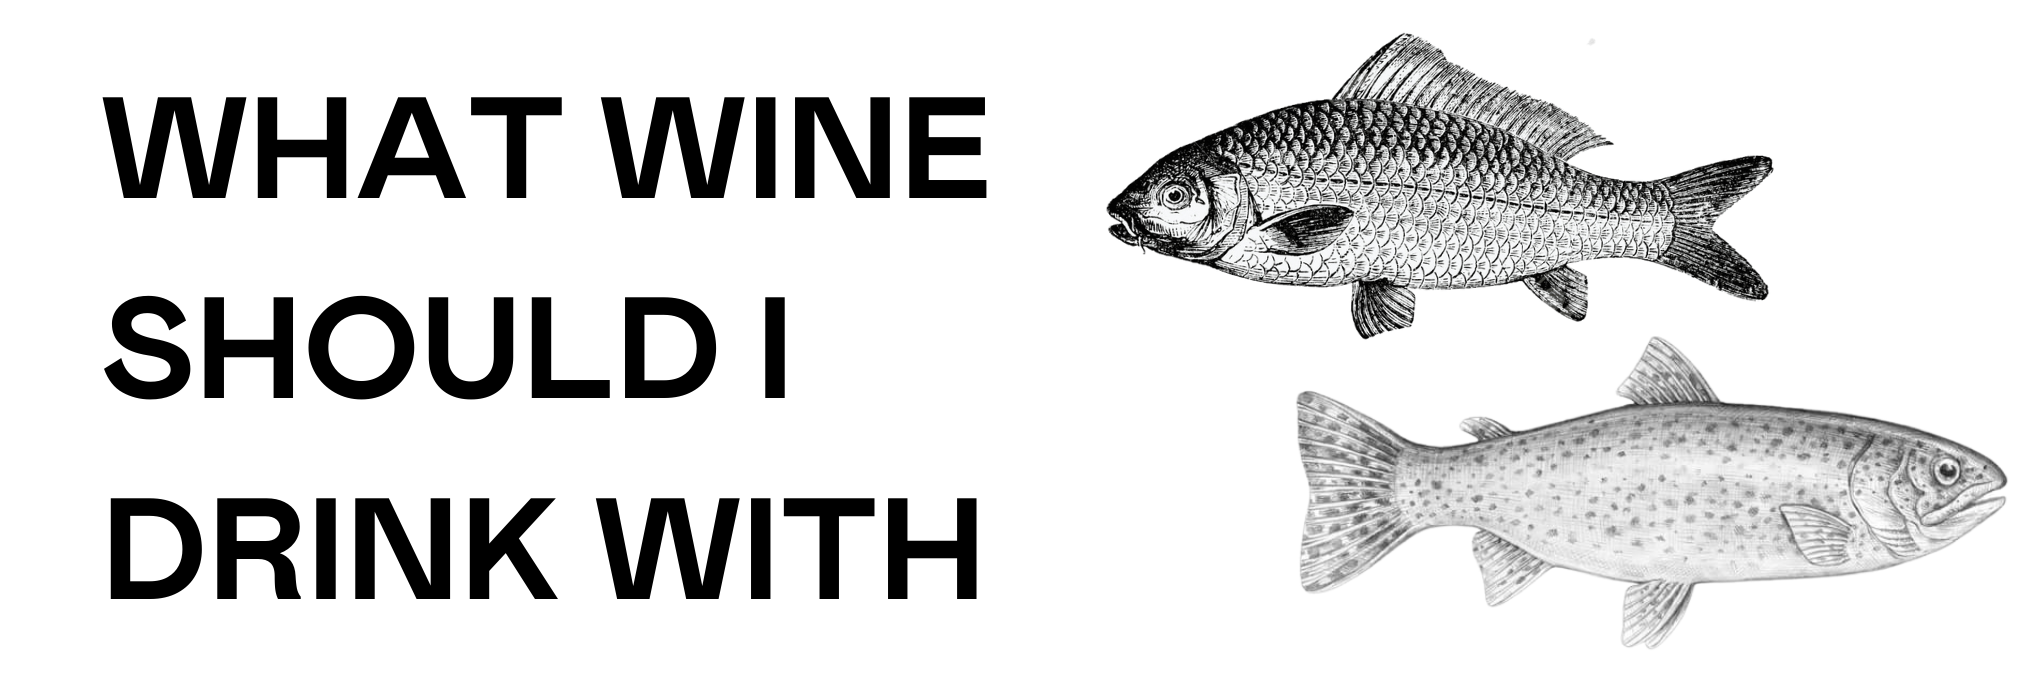 What Red Wine Should I Drink with Seafood?